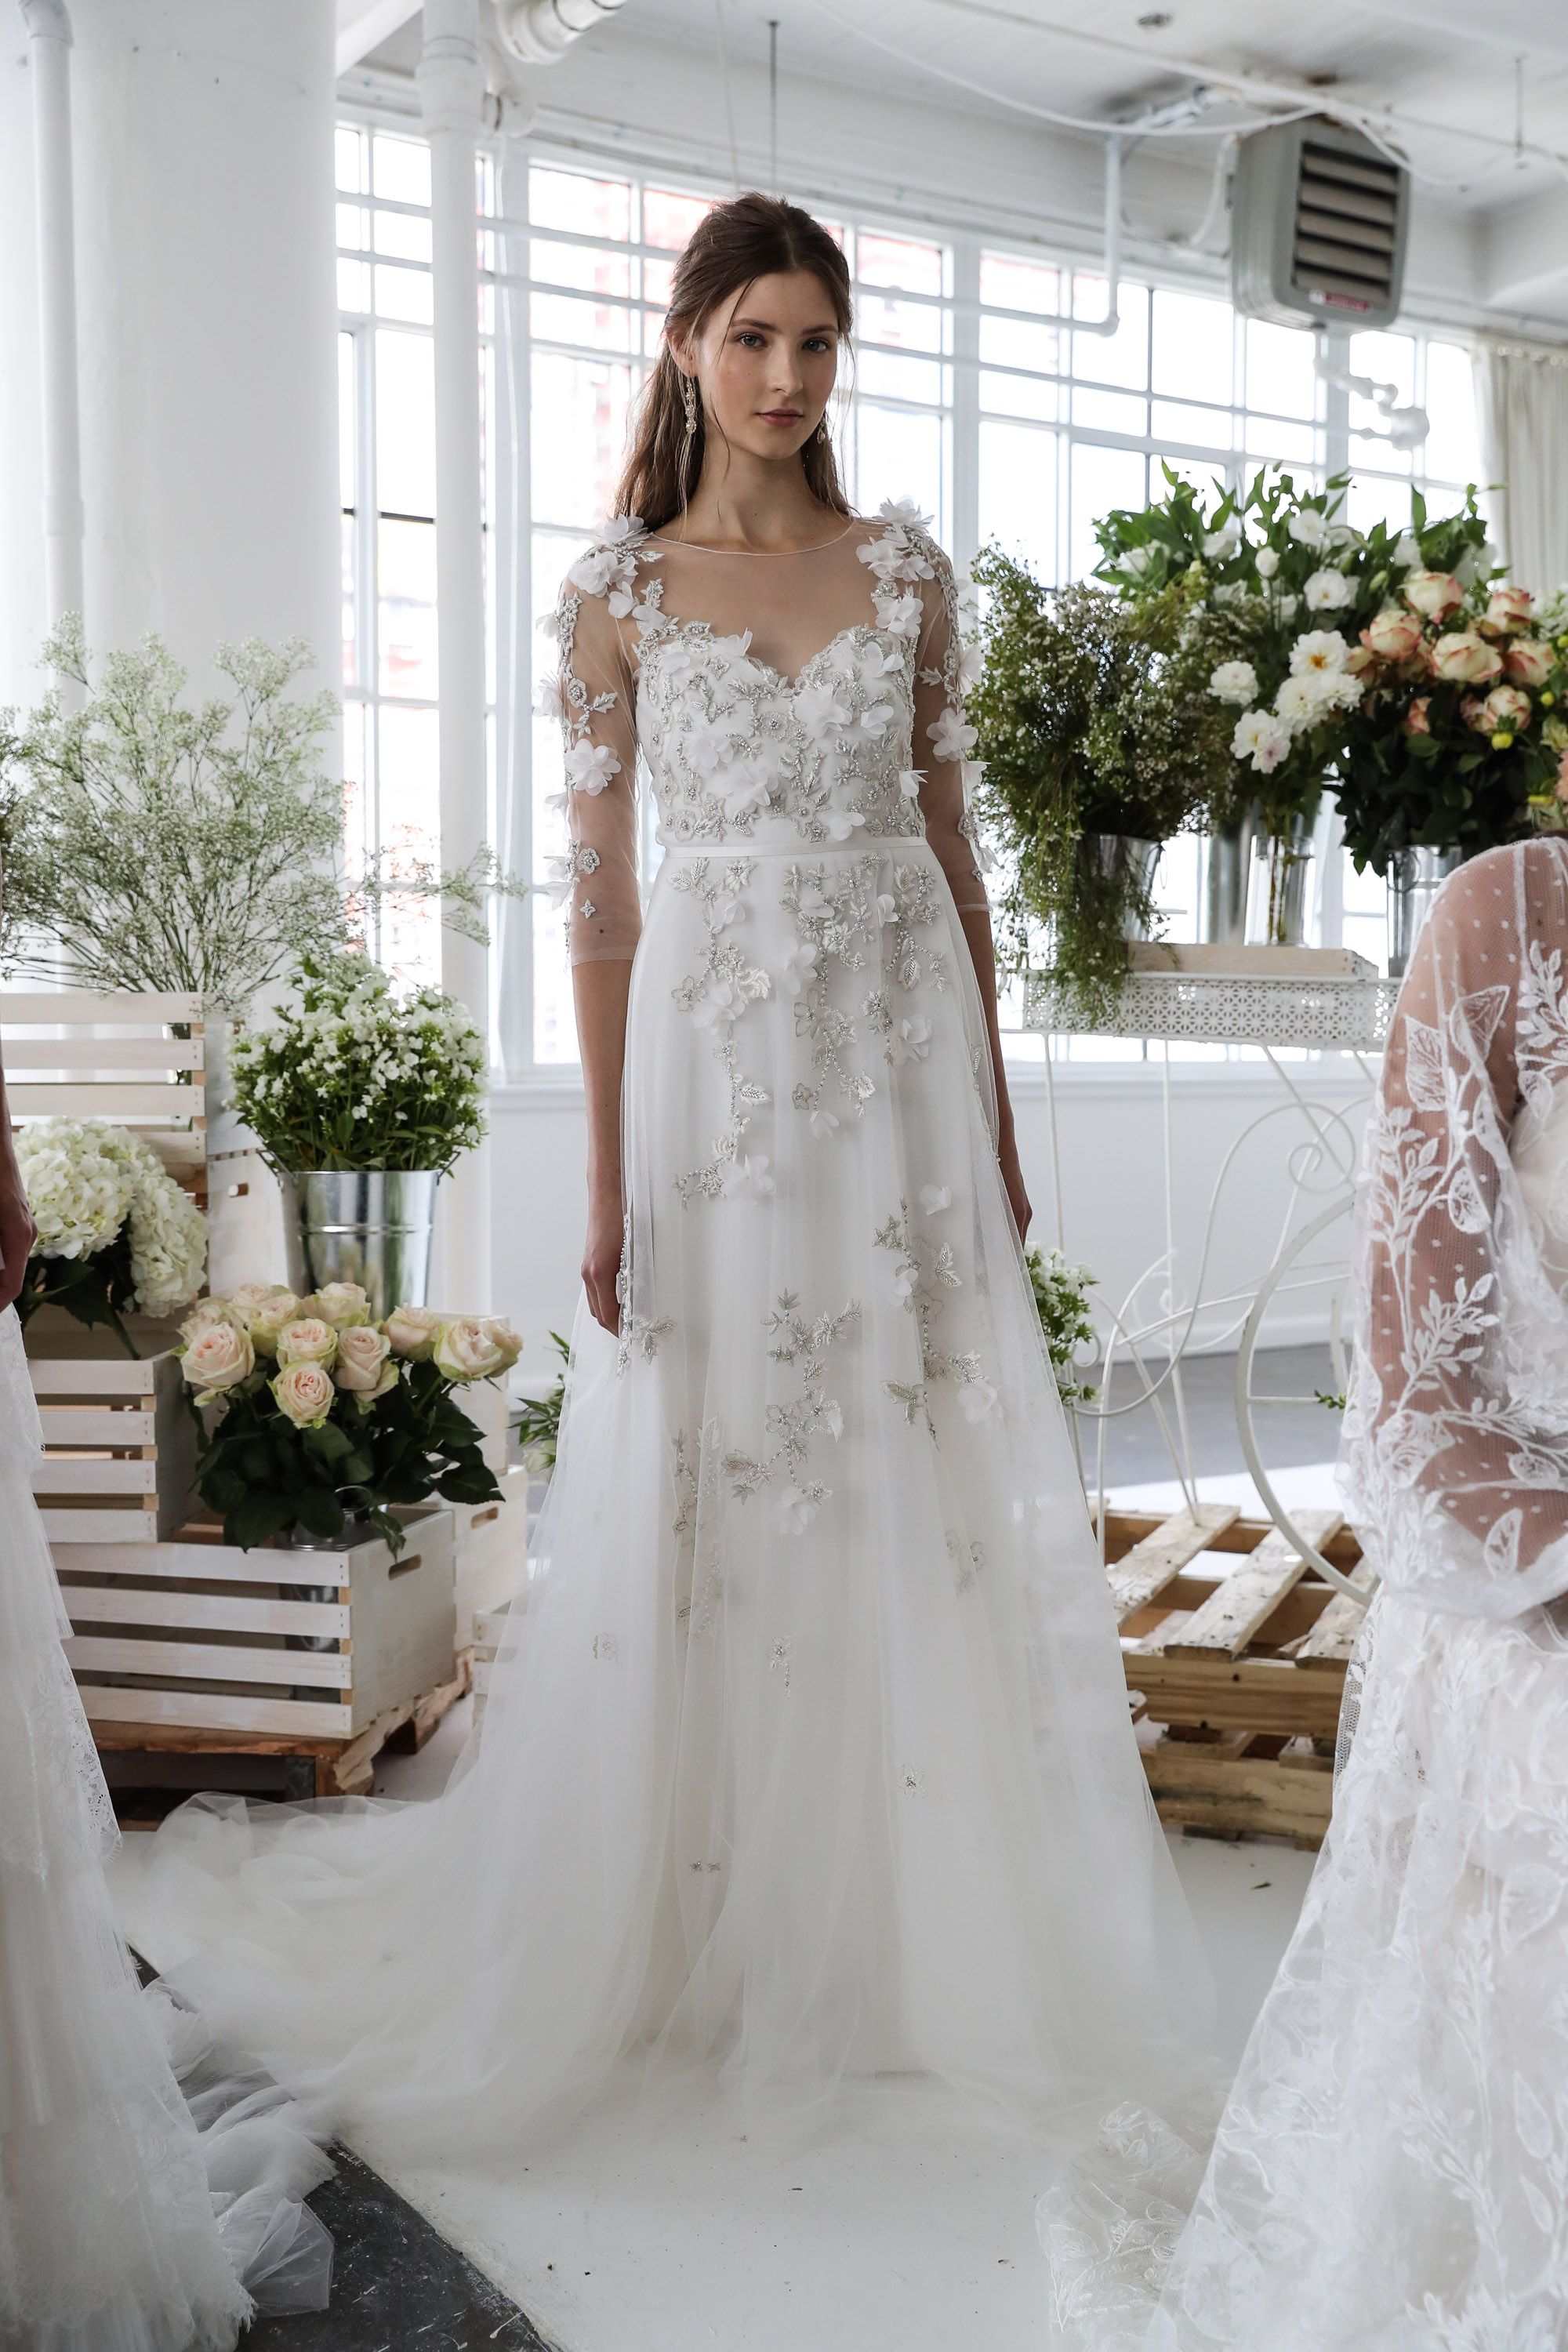 Royal Garden Wedding Dress Collection by Crystal Design Couture - Perfete